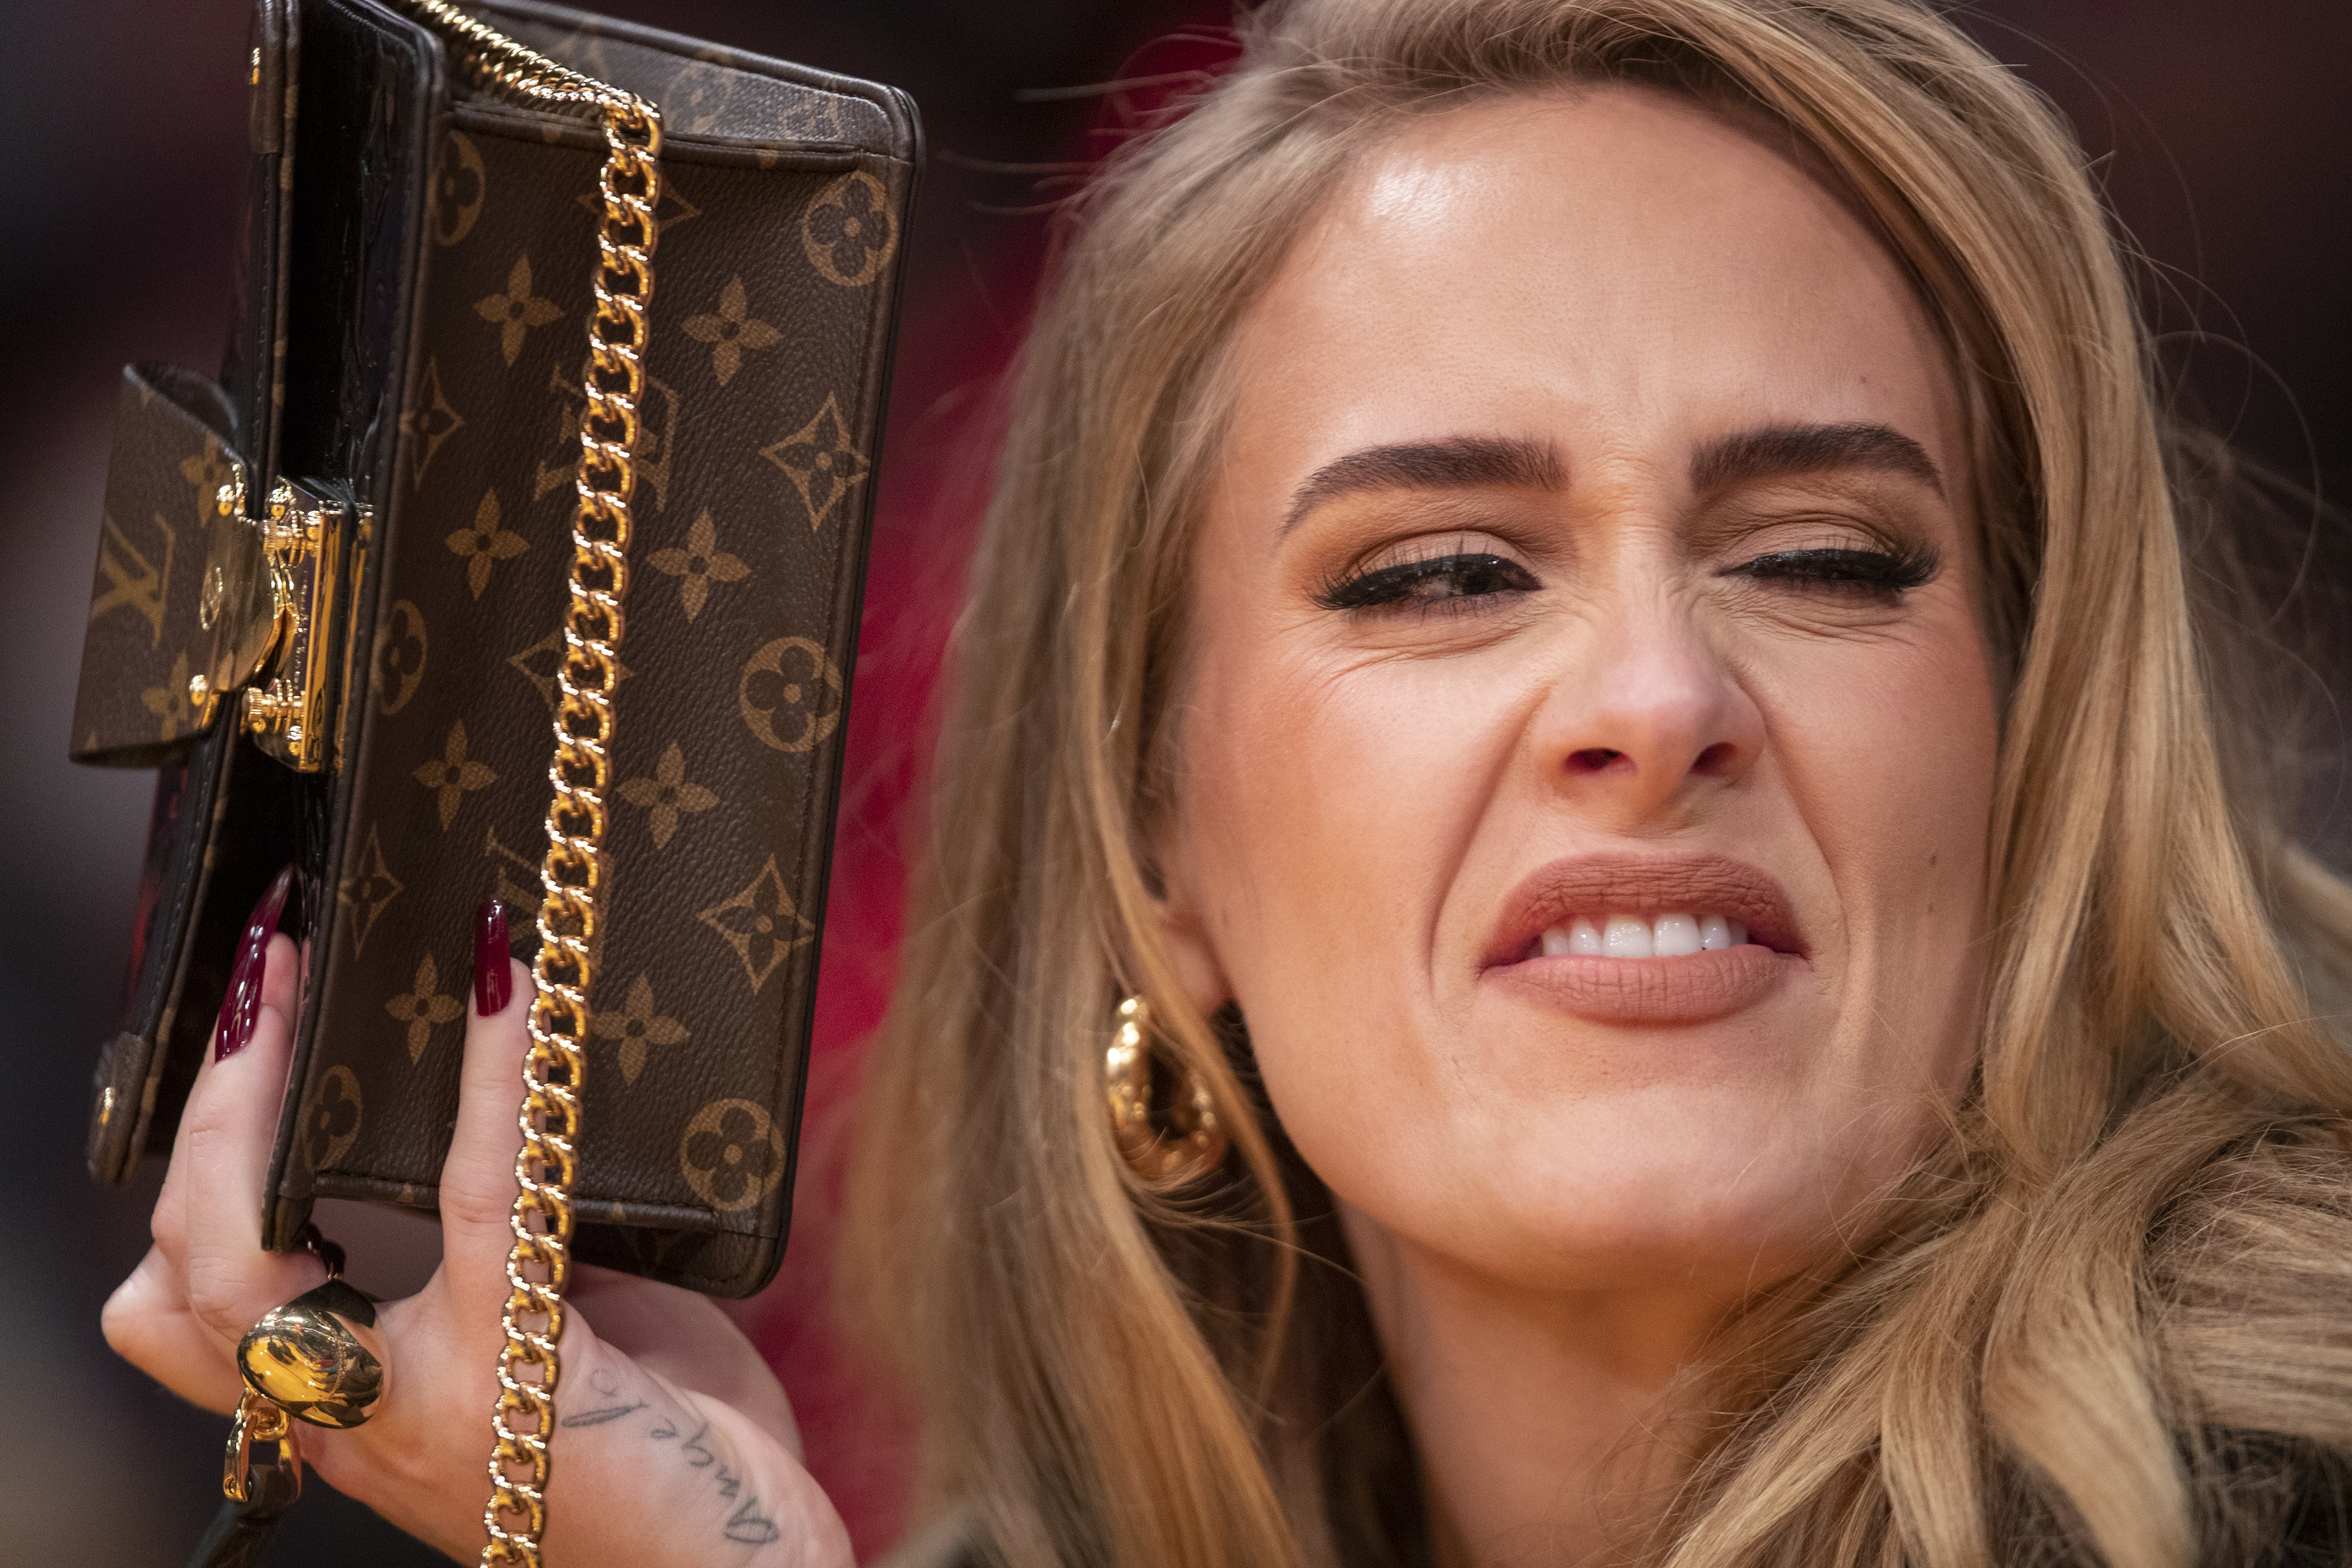 Adele makes a face while hiding behind her purse